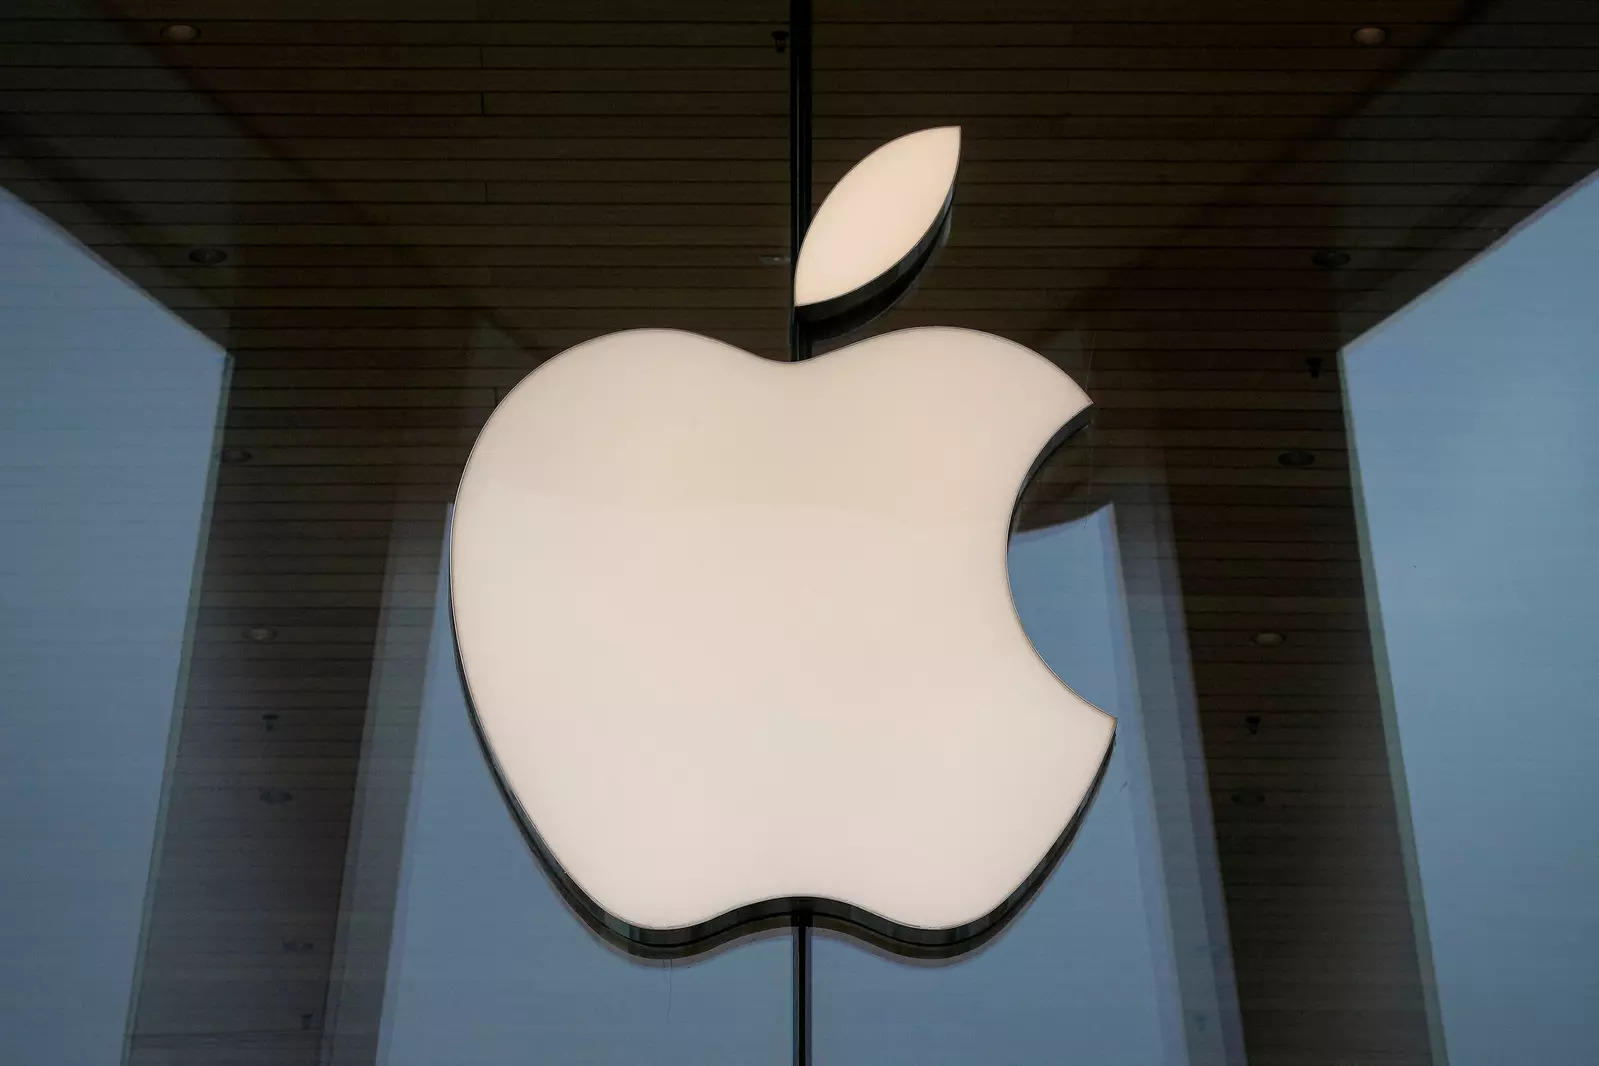 Apple supplier Foxconn logs strong growth, says cautiously optimistic on Q4. (Reuters)